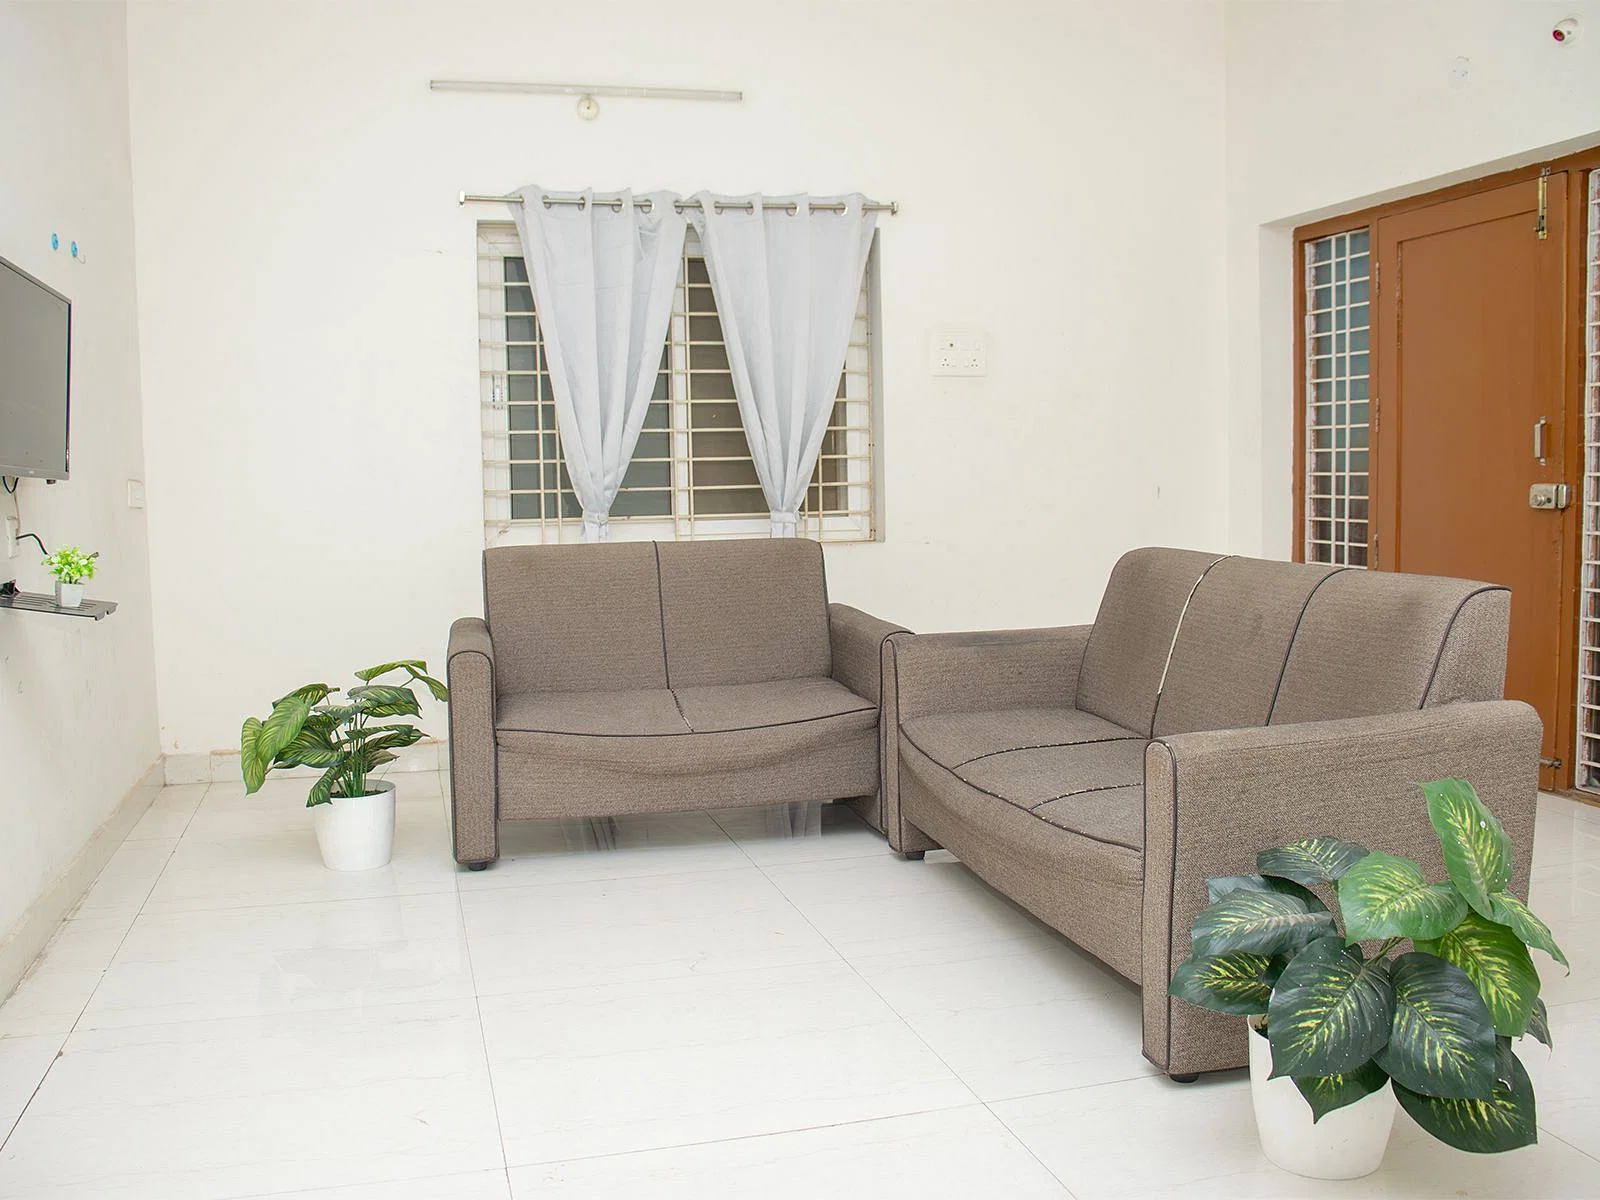 Affordable single rooms for students and working professionals in KPHB-Hyderabad-Zolo Midway